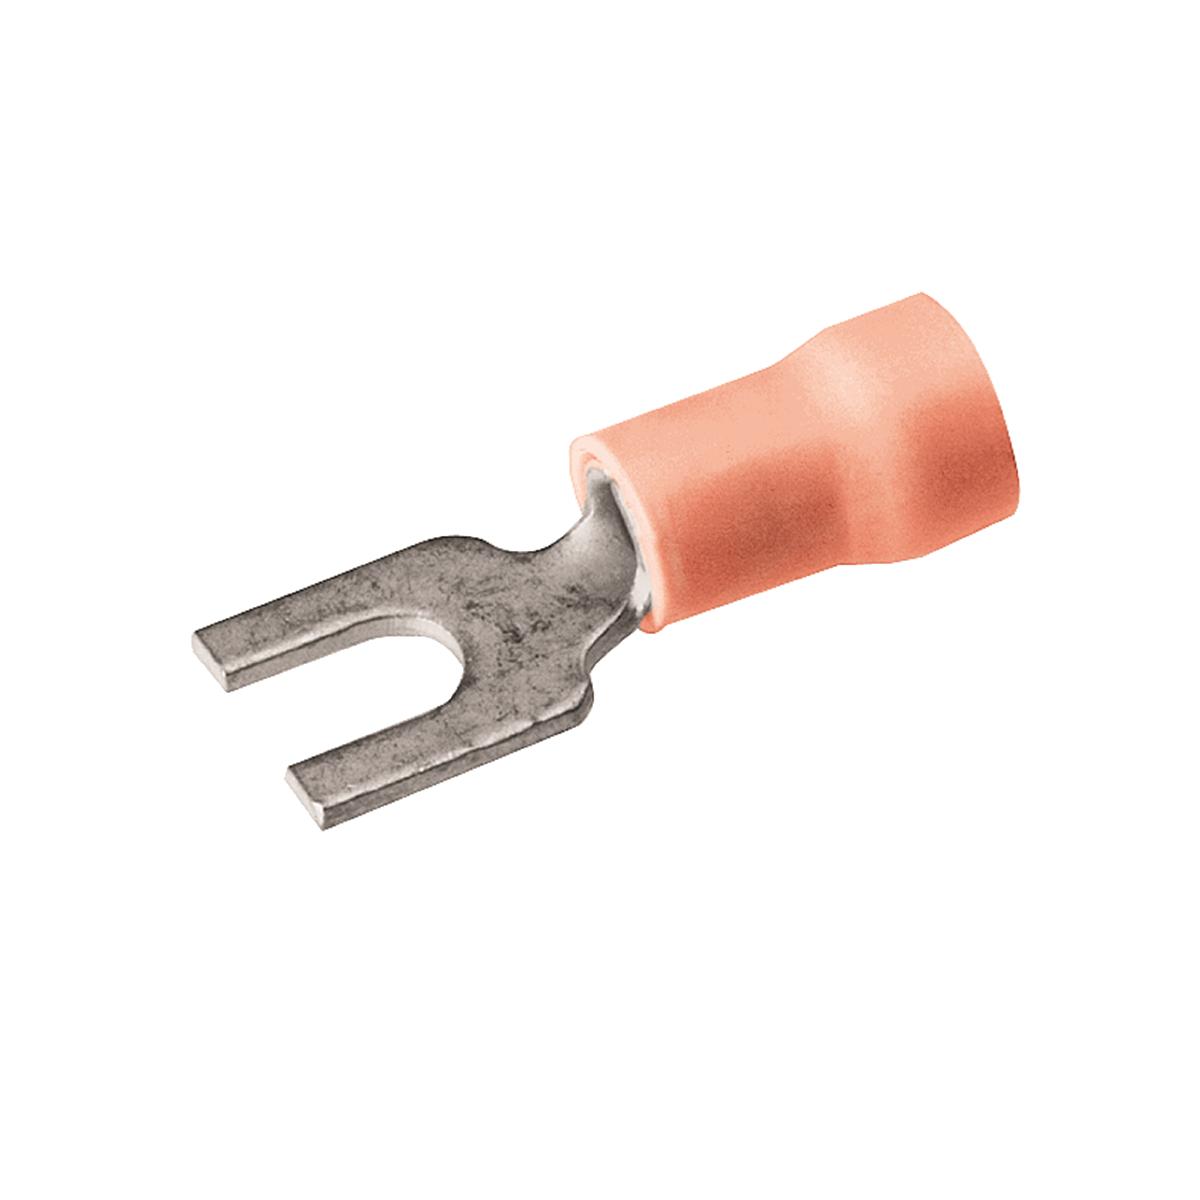 Hubbell BA16EF2 Vinyl Fork Terminal For 22 - 16 AWG.  ; Fork terminals are constructed of pure electrolytic copper ; Long brazed seam barrel with deep V groove inner serations for optimum conductivity, reliability and holding power after crimping ; Fork tongue design for